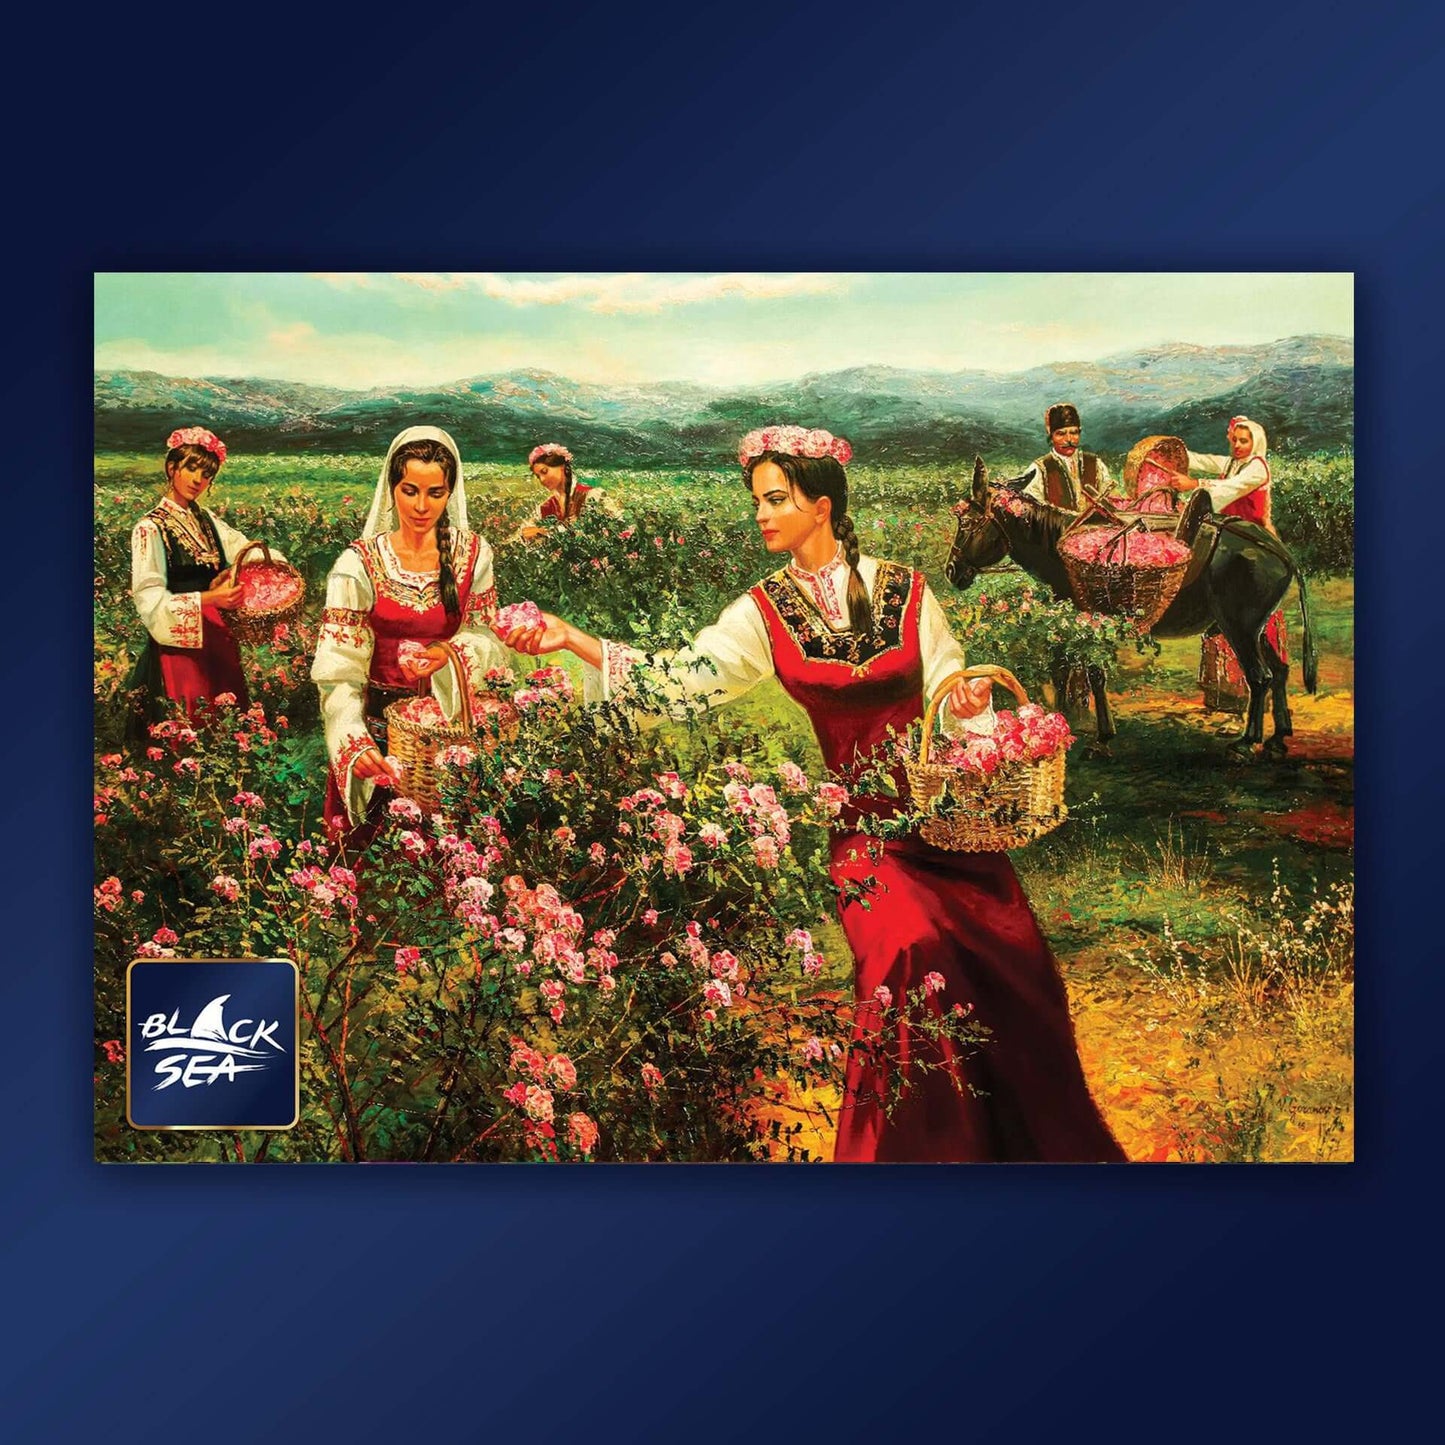 Puzzle Black Sea 1000 pieces - Rose picking, Bulgaria is blessed with magically beautiful nature and roses are one of its treasures that have earned worldwide recognition. Rose flowers are soft and tender, and their scent brings along a feeling of purity,